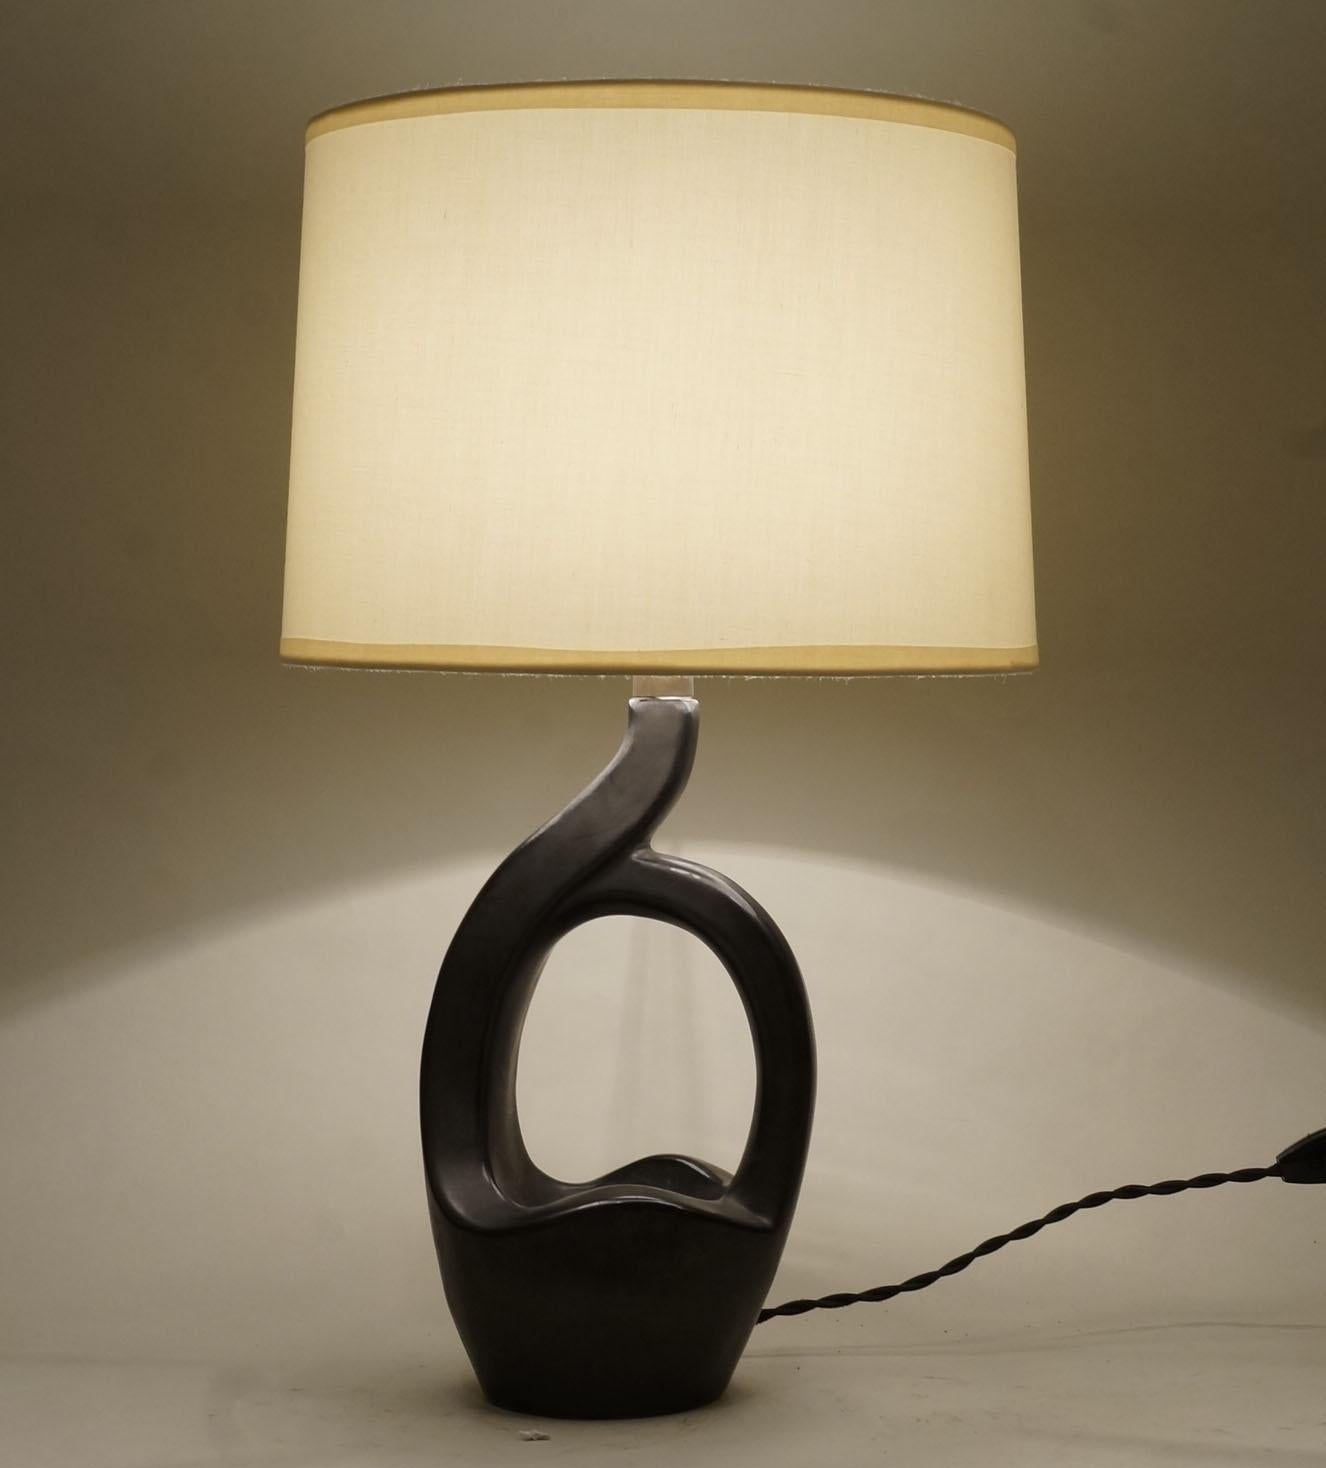 Black ceramic table lamp. Custom made fabric lampshade. Rewired with twisted silk cord. Measure: Ceramic body height 25 cm – 9.9 in.
Height with lampshade 44 cm – 17.3 in.